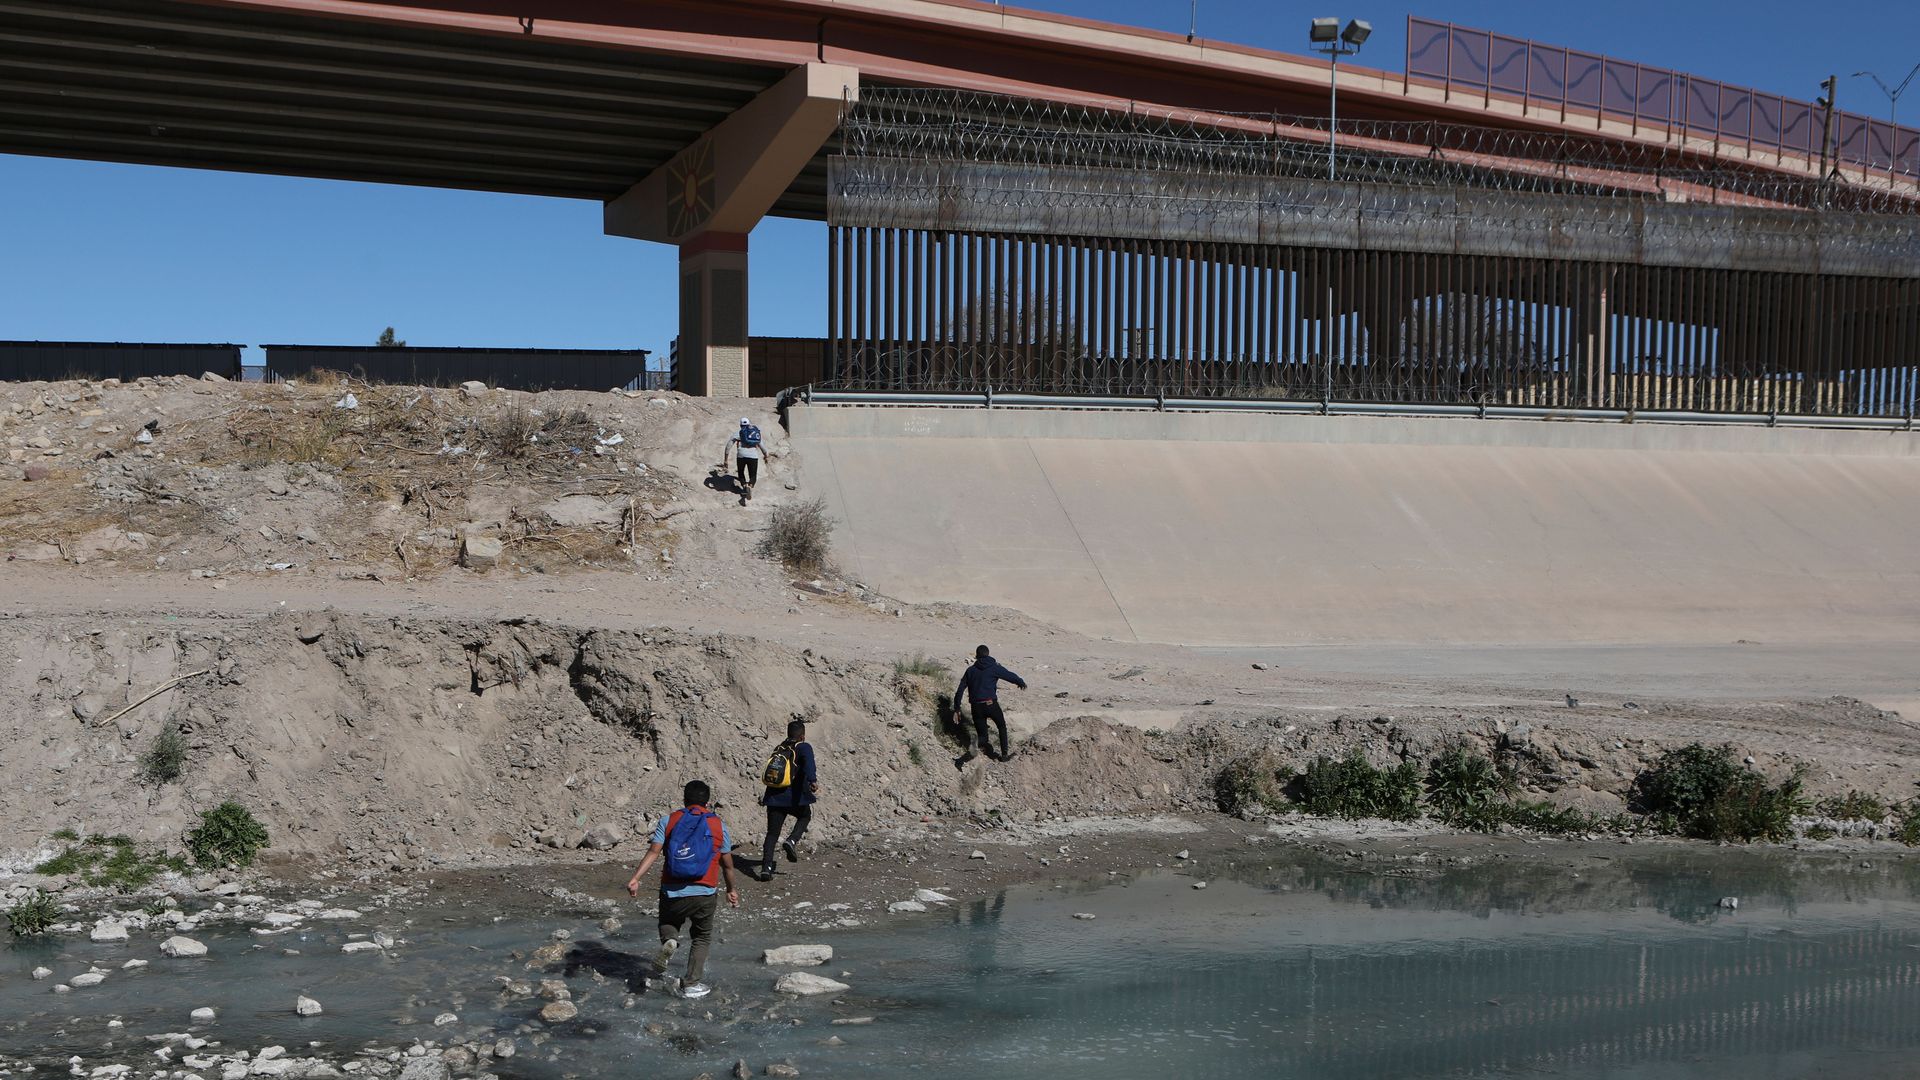 Migrants cross the Rio Bravo to get to El Paso, state of Texas from Ciudad Juarez, Chihuahua state, Mexico 